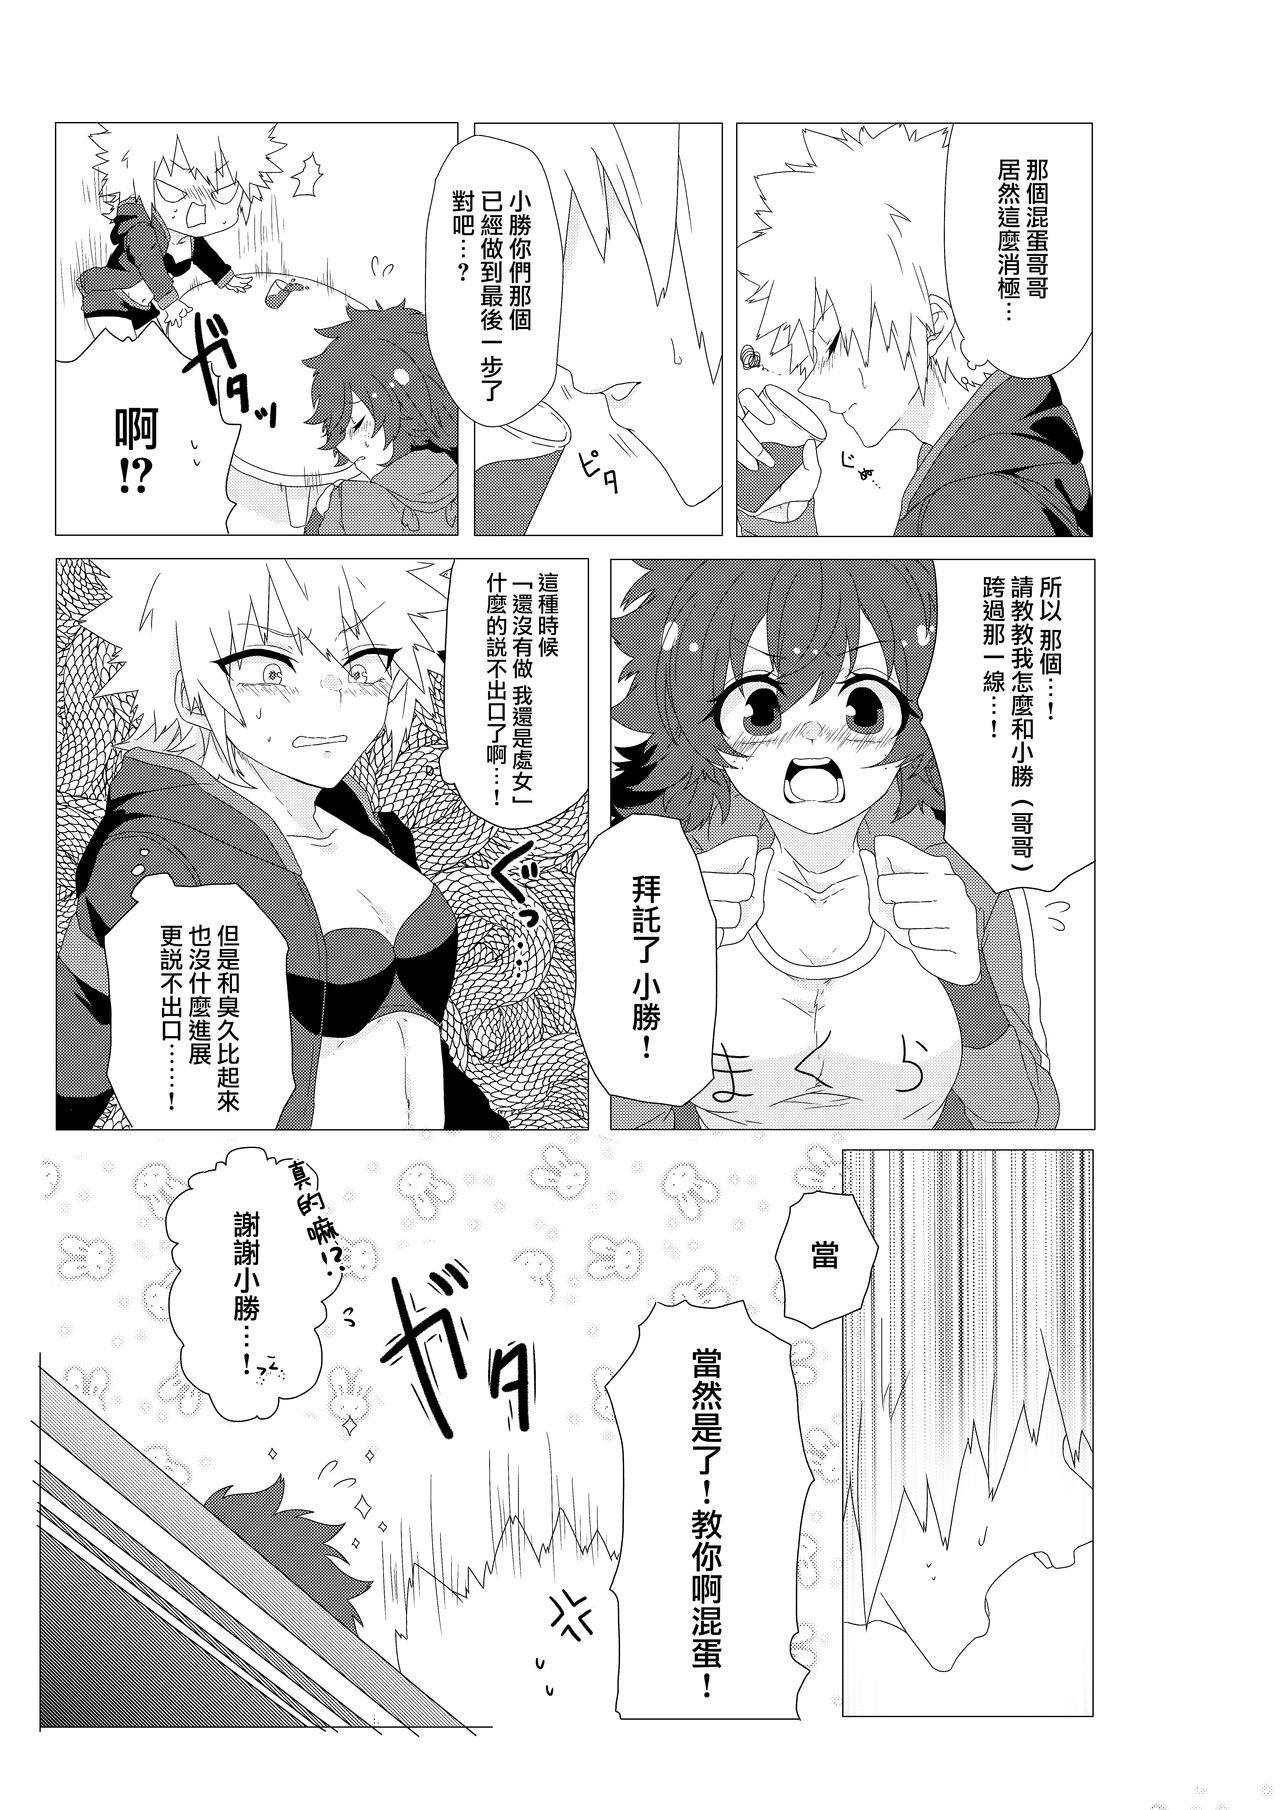 Amateur Chicken na Kareshi to Lingerie - My hero academia Body - Page 5